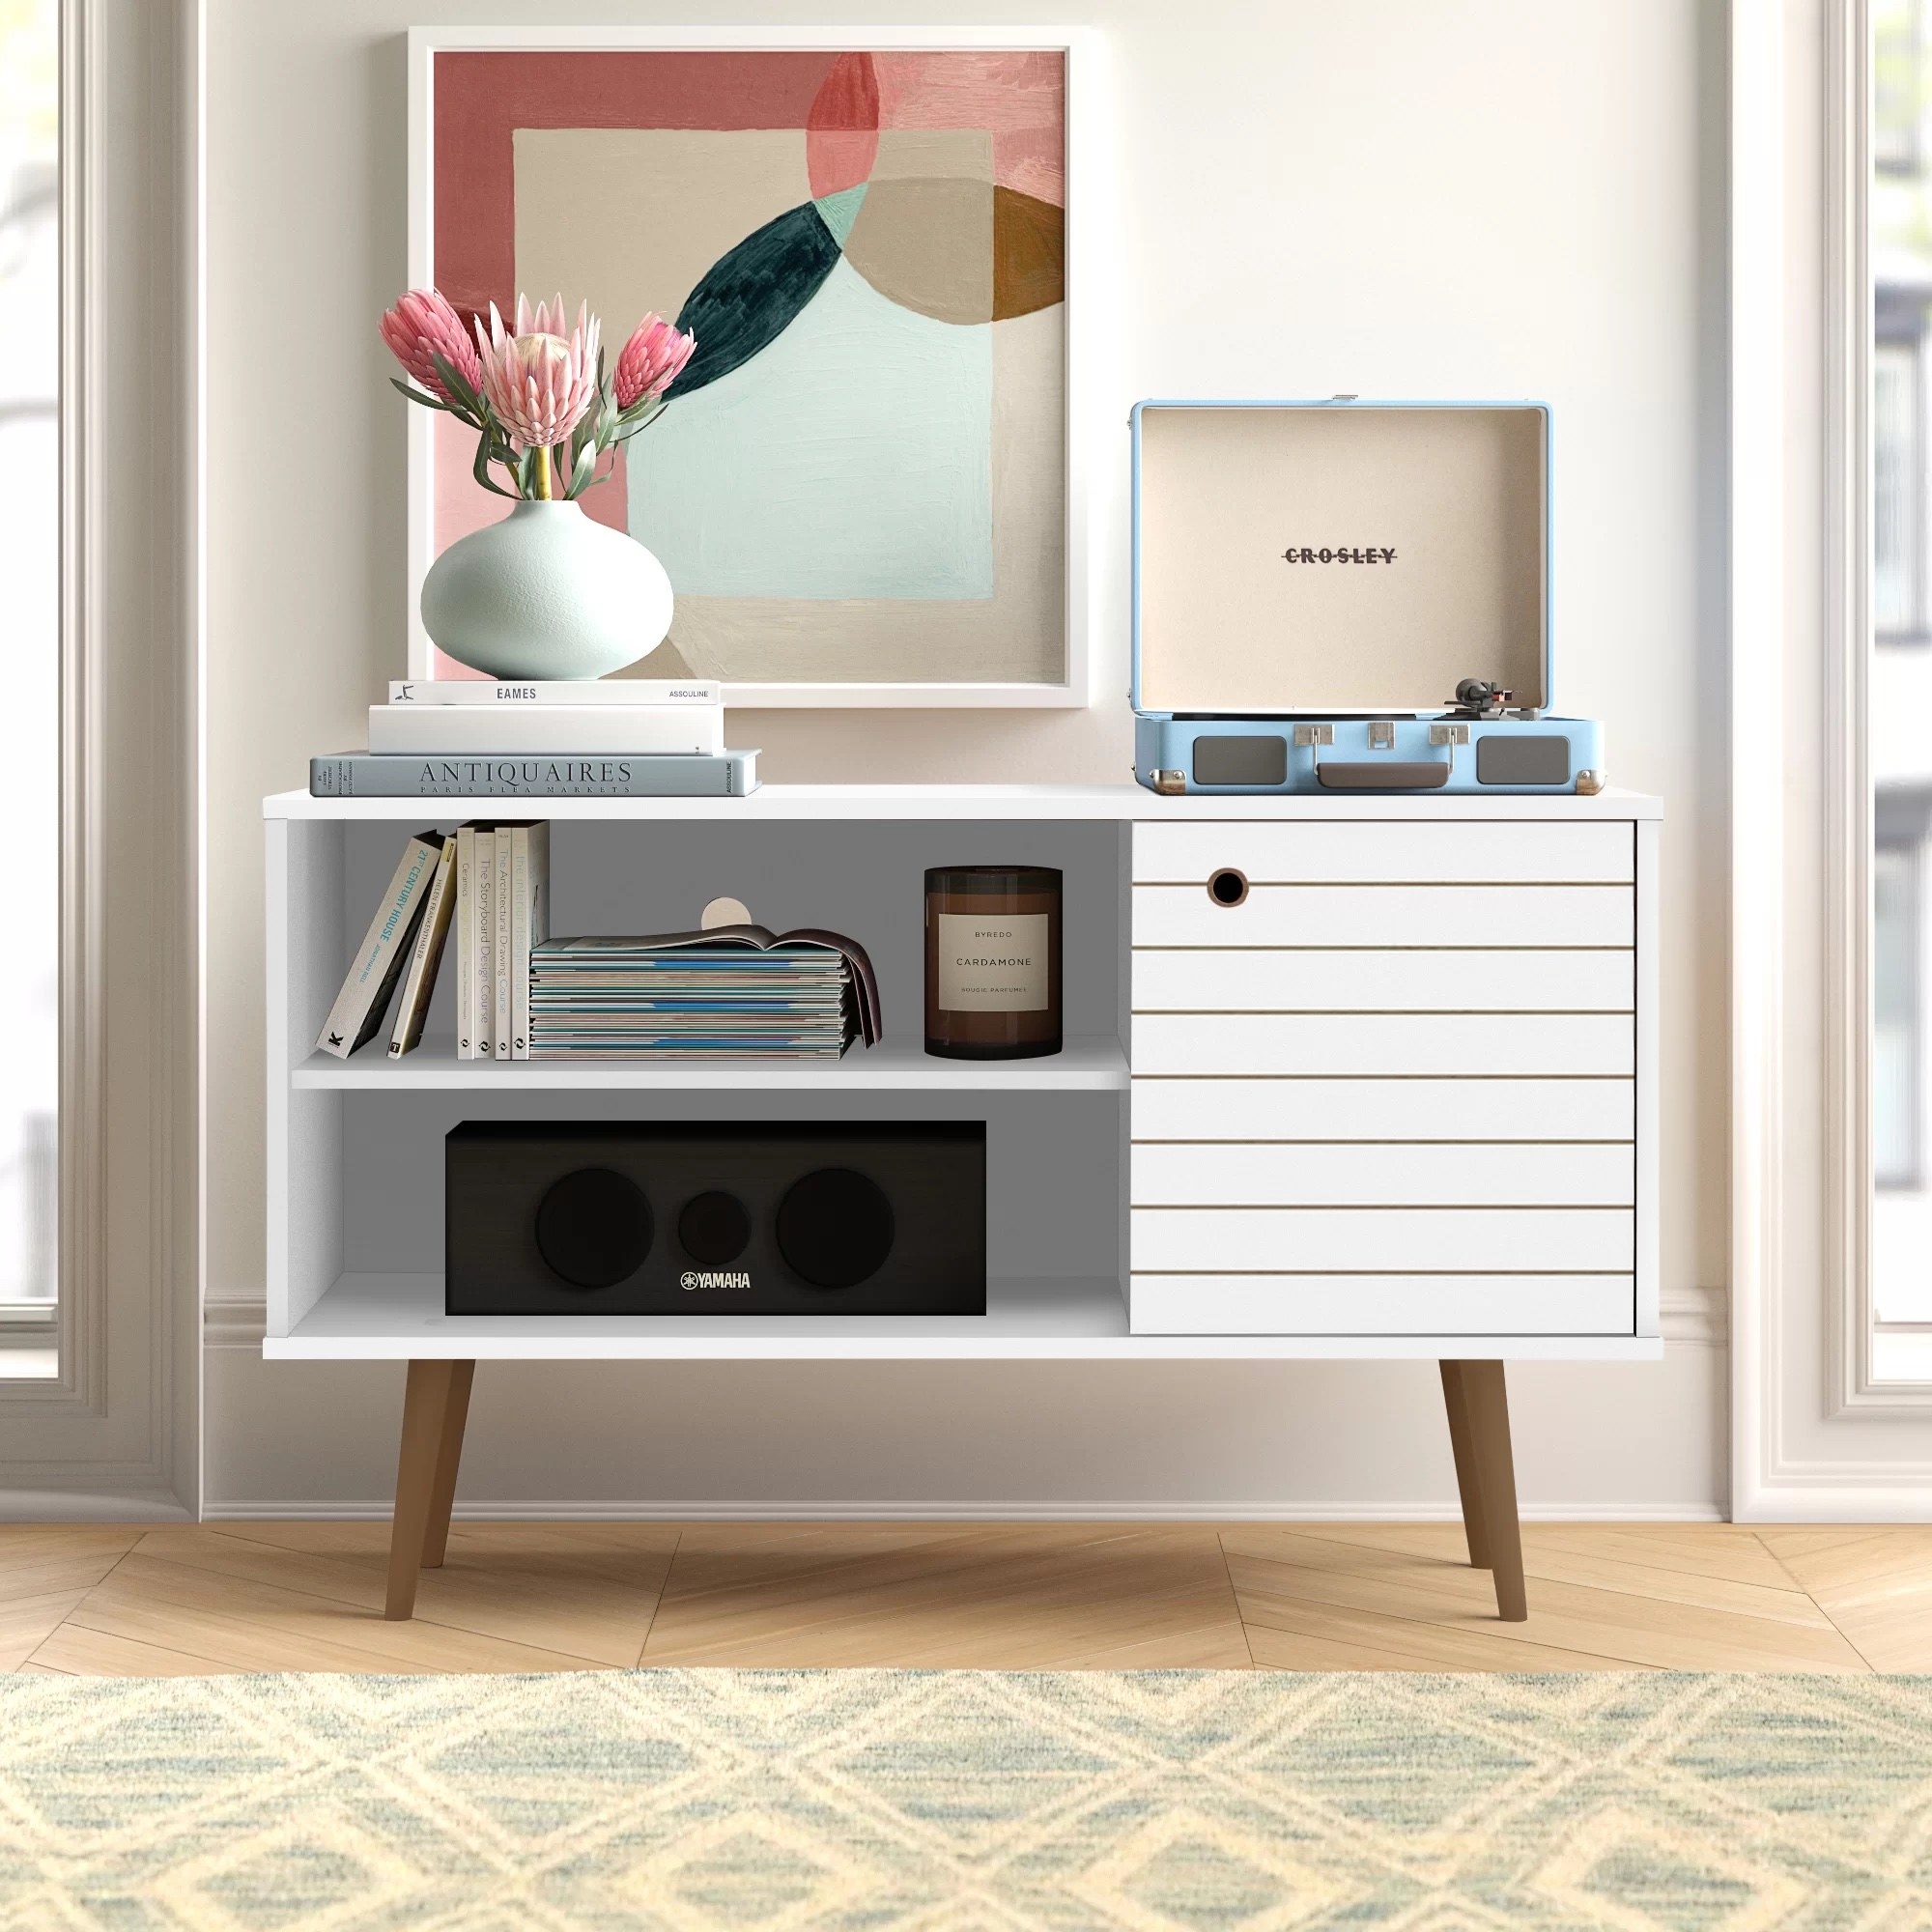 A tv stand holding a stereo, vinyl record player, books, and a vase